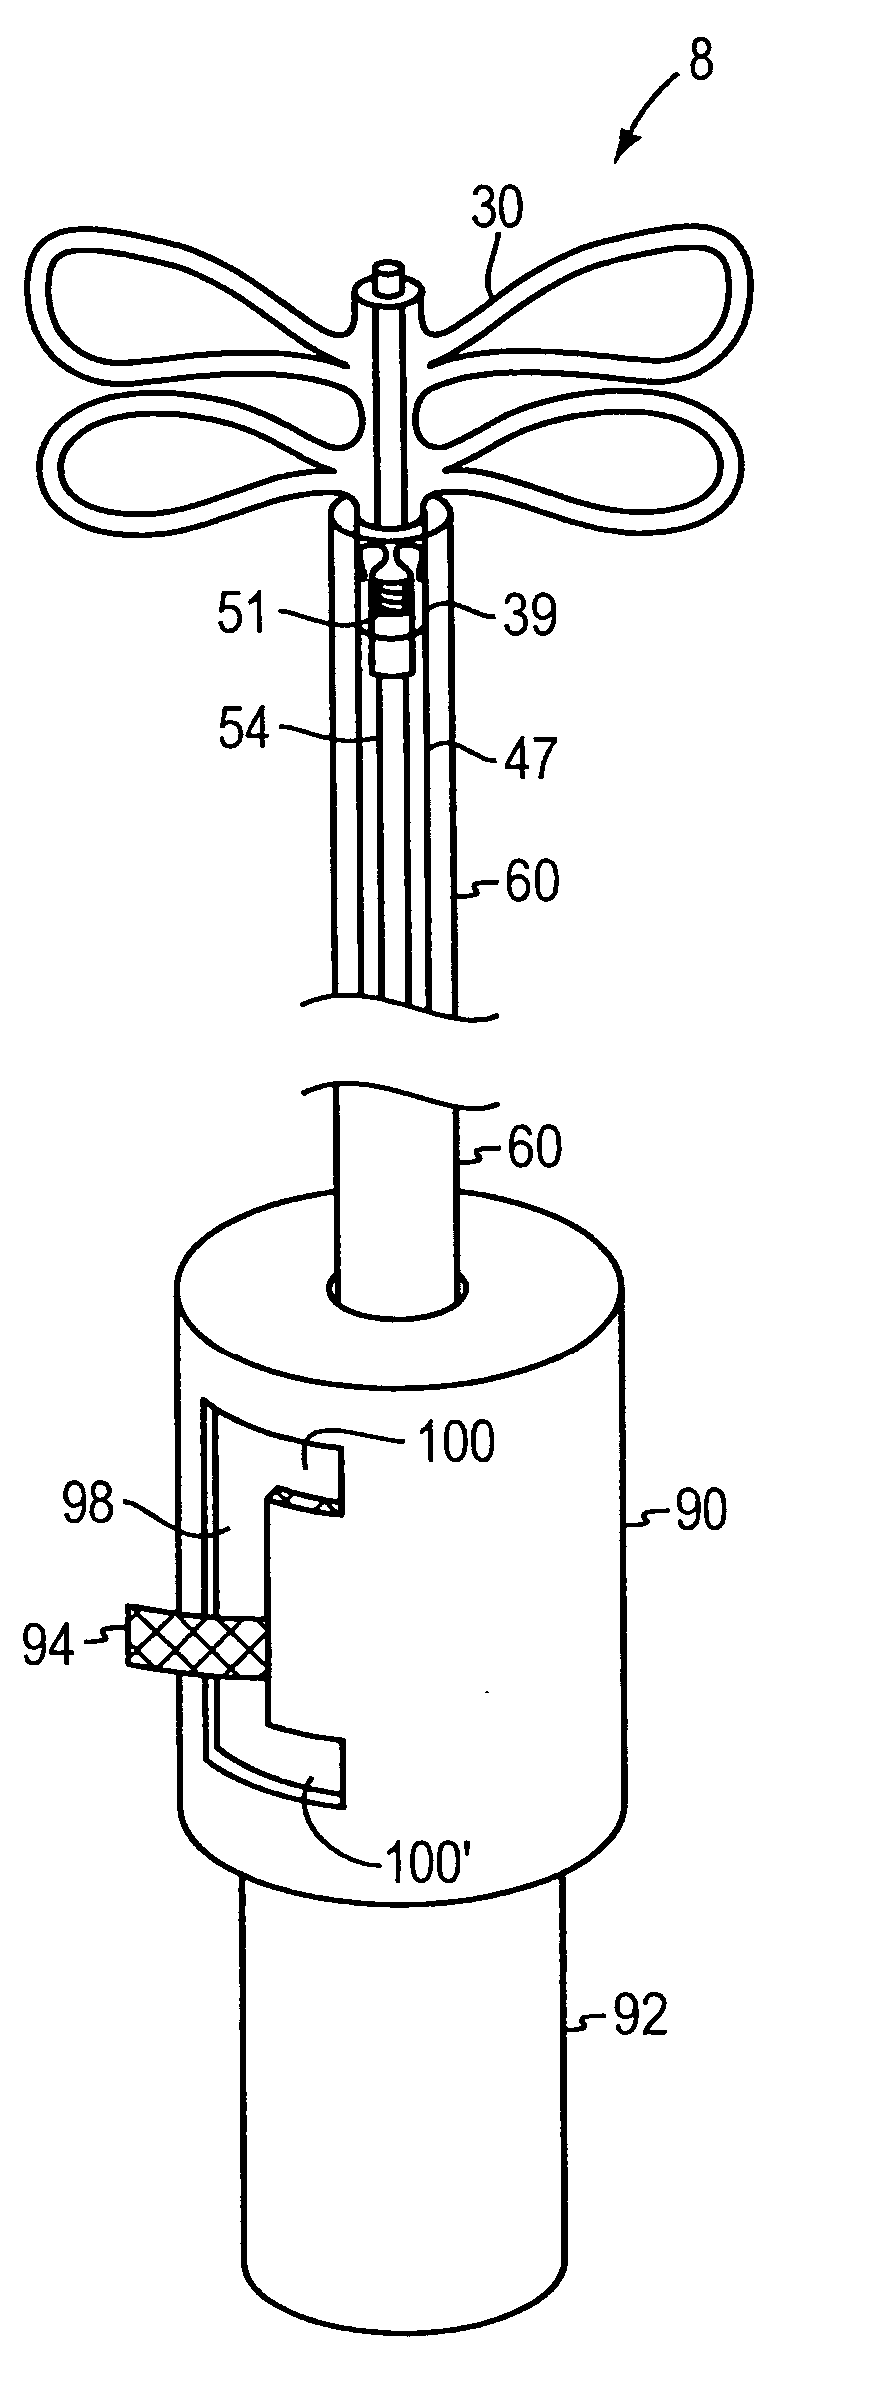 Delivery device for implant with dual attachment sites